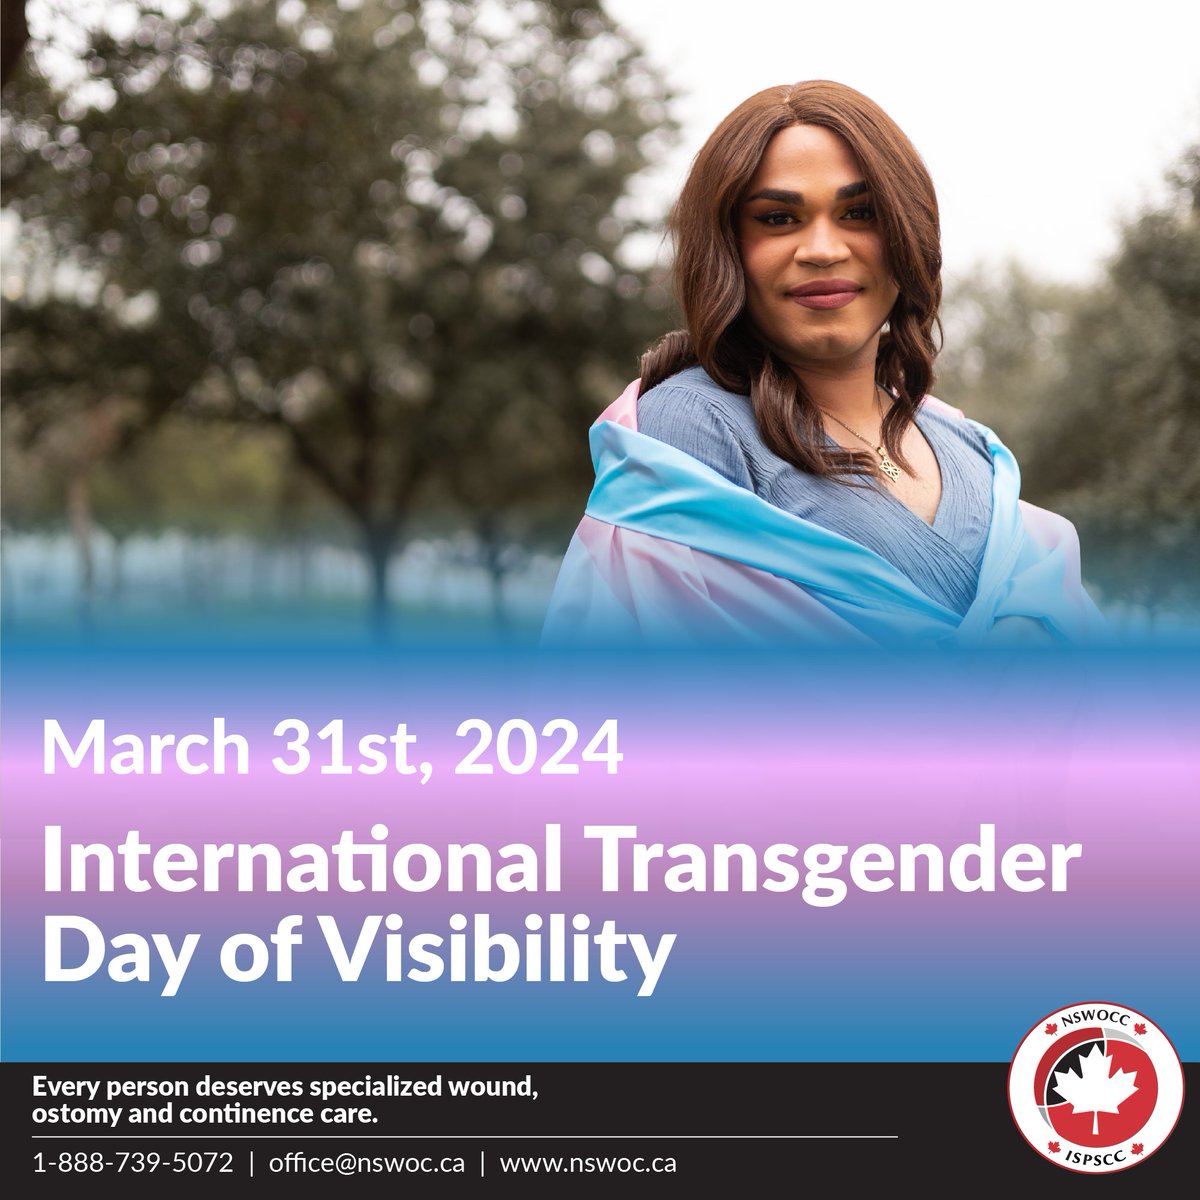 As we approach March 31st, we stand together to recognize and celebrate International Transgender Day of Visibility. Learn more at nswoc.ca